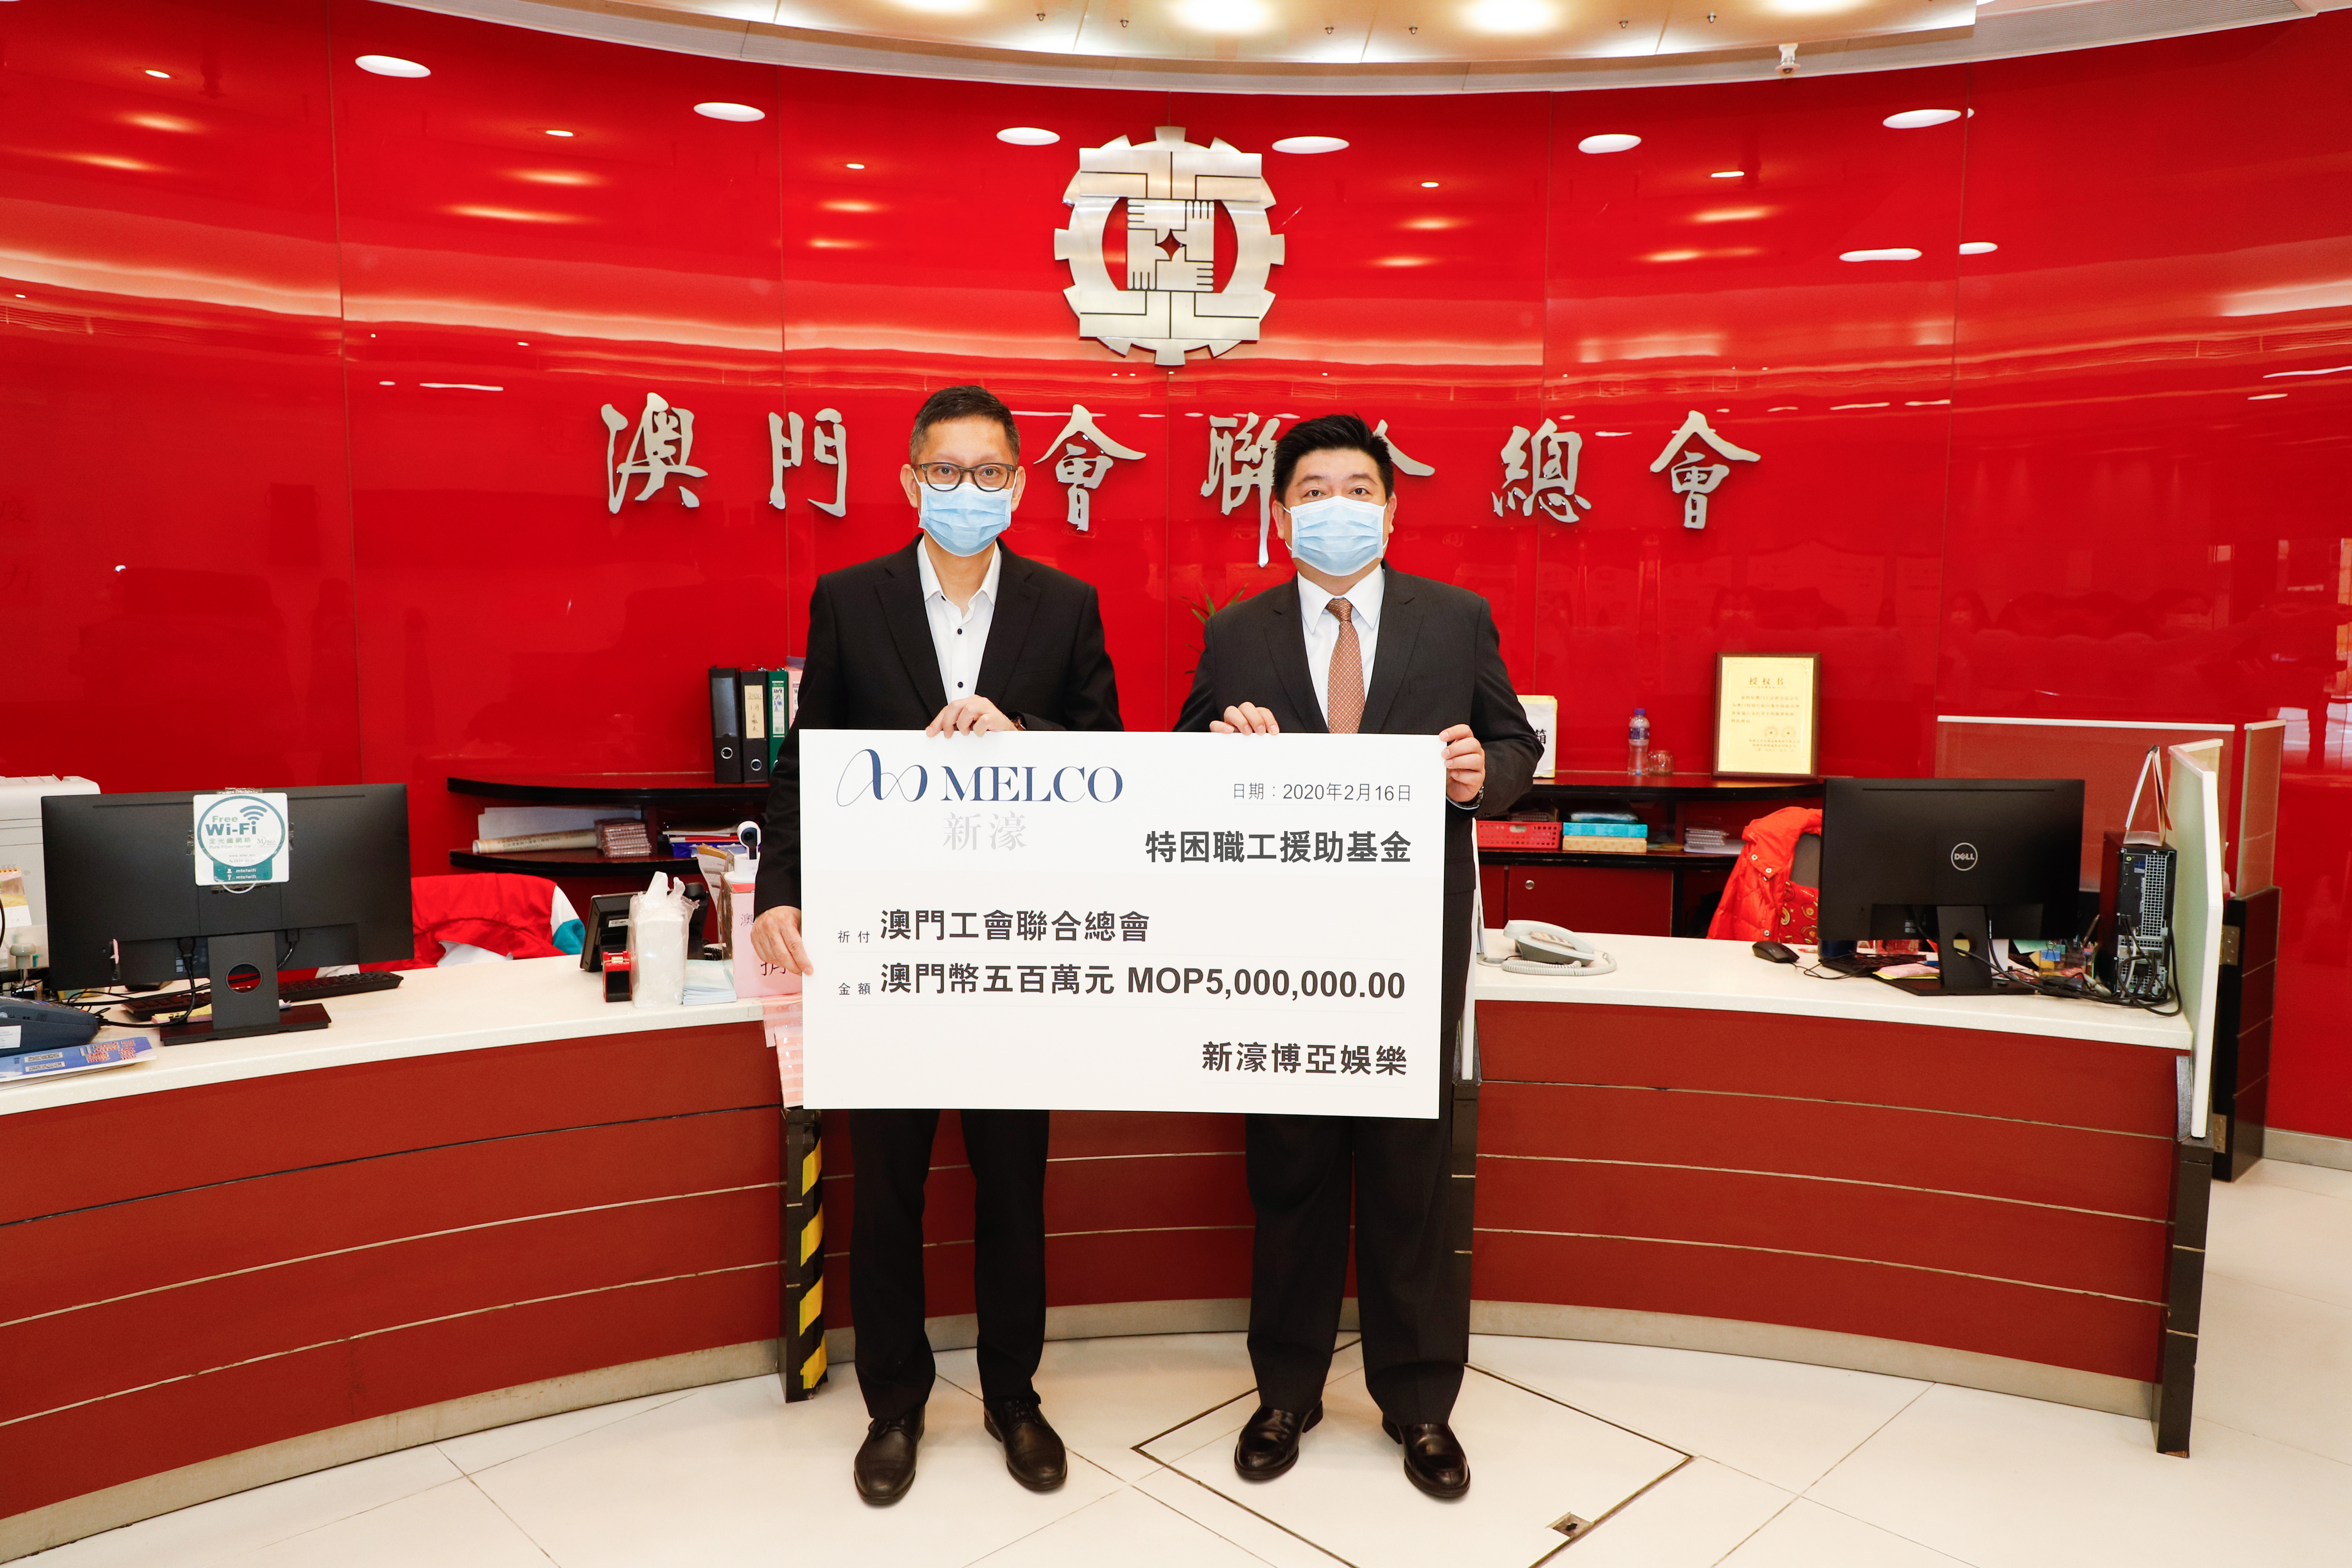 Melco Chief Advisor, Dr. Kent Wong presents a MOP 5 million donation cheque to Mr. Lee Chong Cheng, President of Macao Federation of Trade Unions for the set up of the Special Aid Fund for Works in Need.